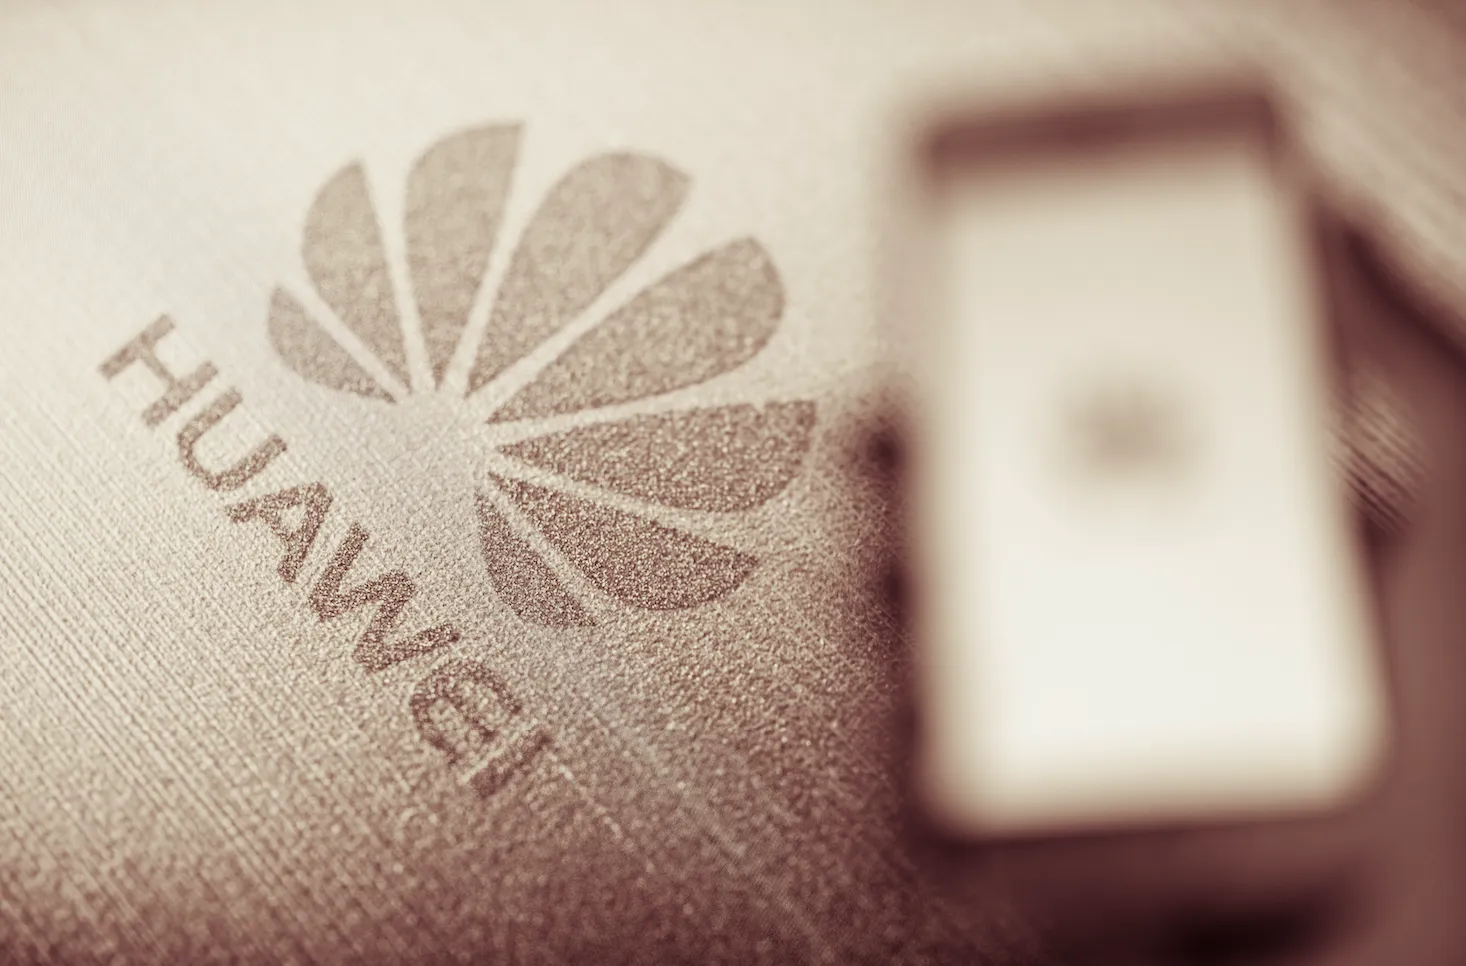 Billions from the government to Huawei to become a chipset giant